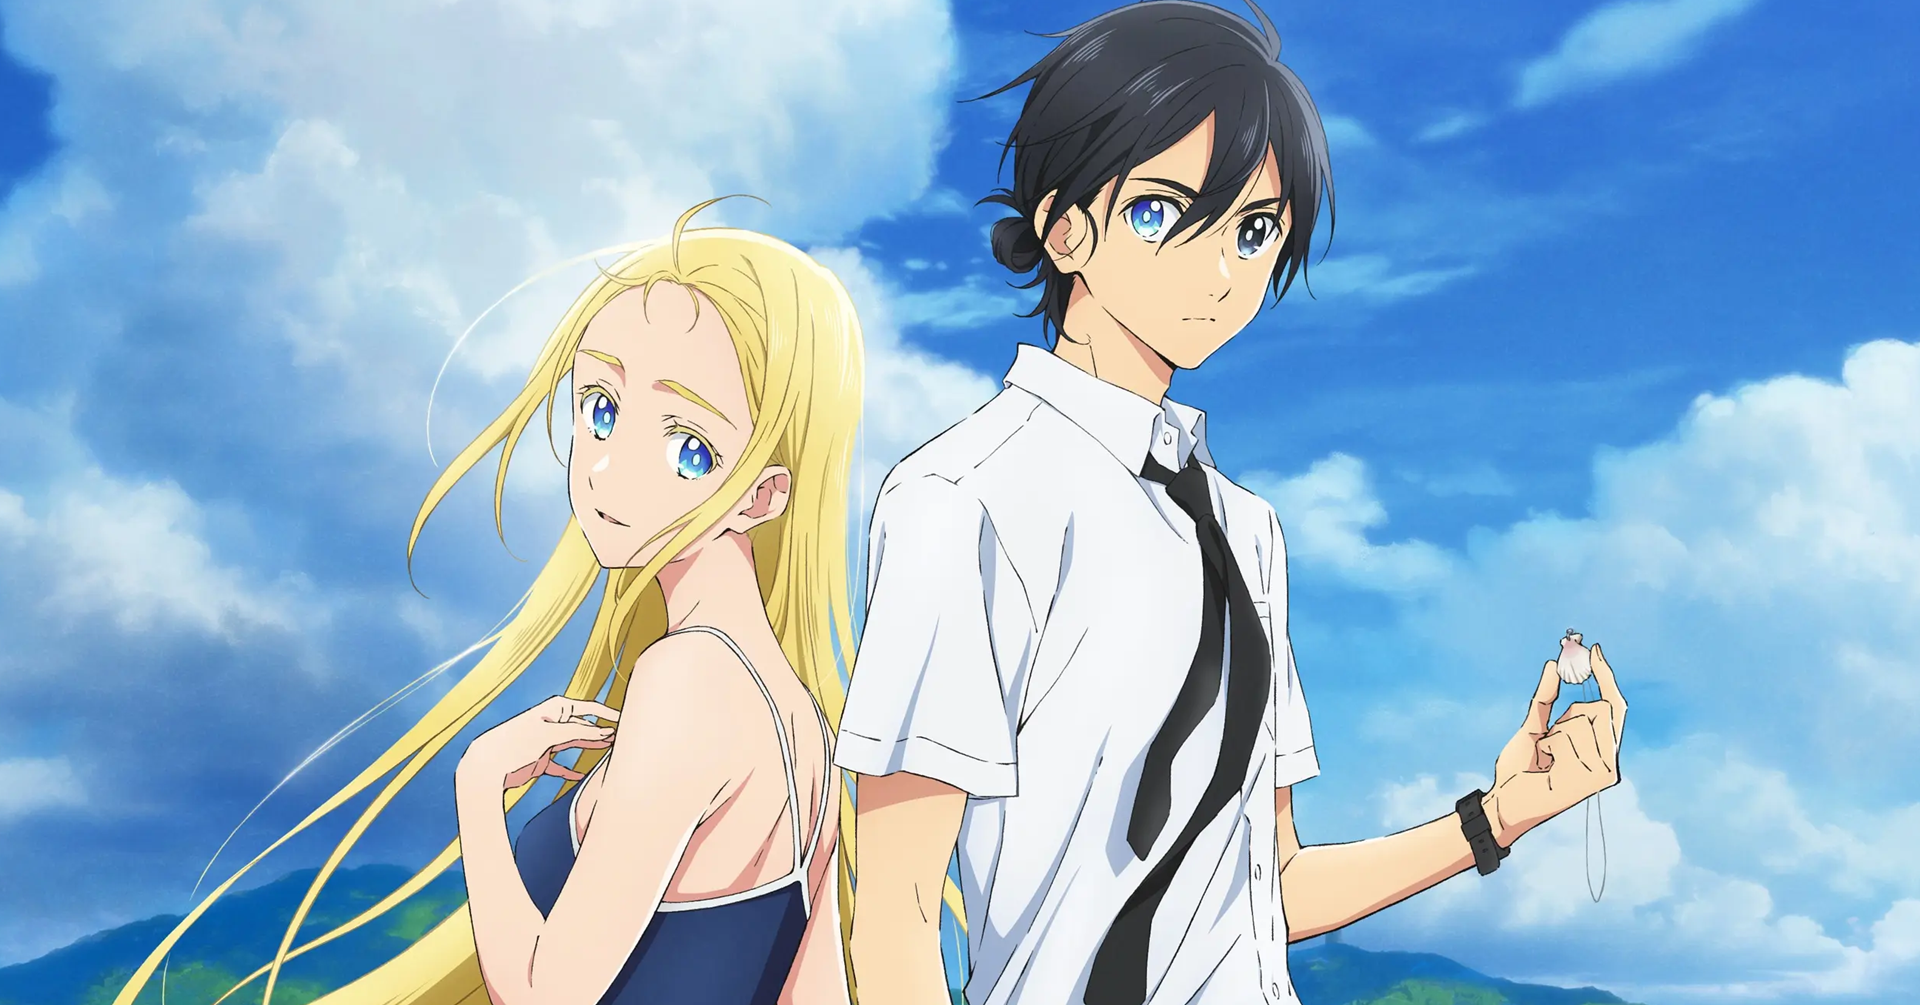 Summer Time Rendering Anime Reveals 4 Most Cast Members, April 14